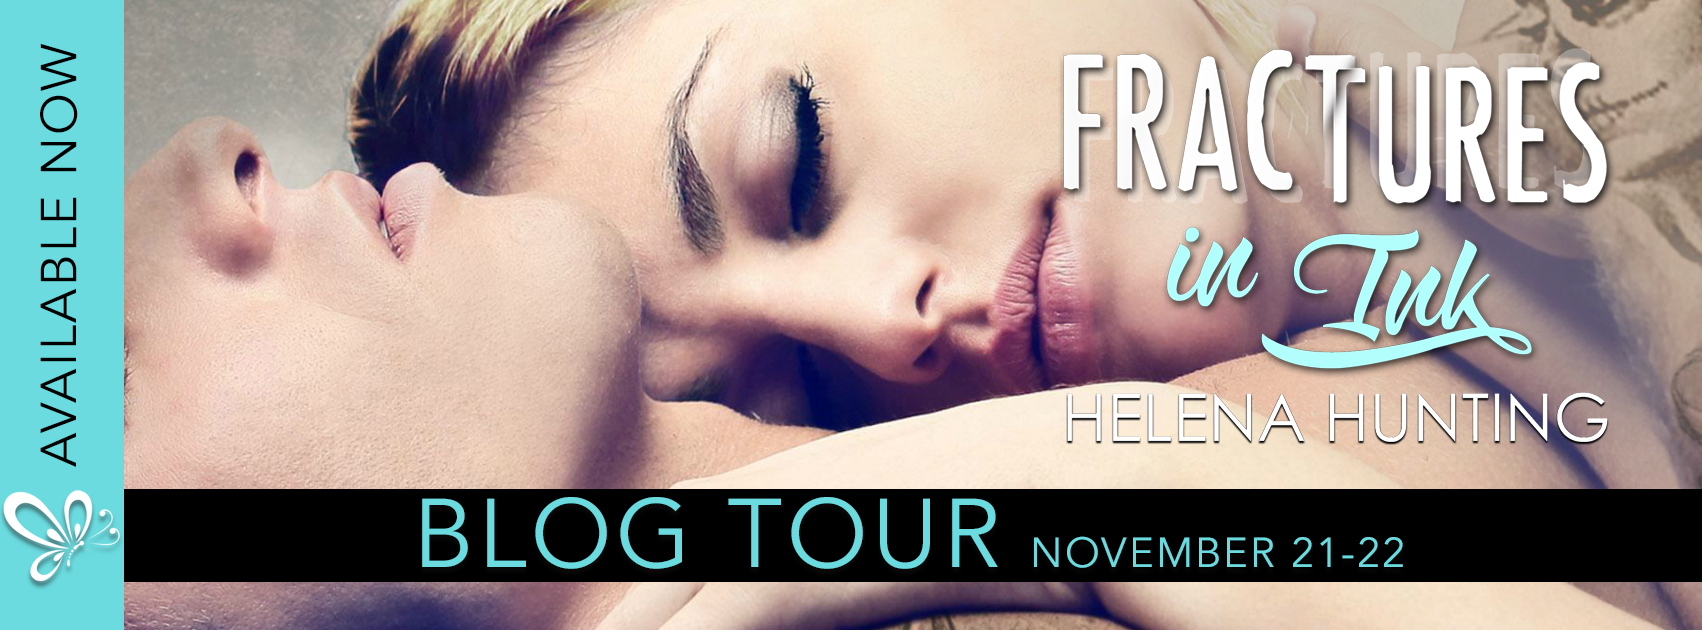 Fractures in Ink by Helena Hunting #BlogTour #Review